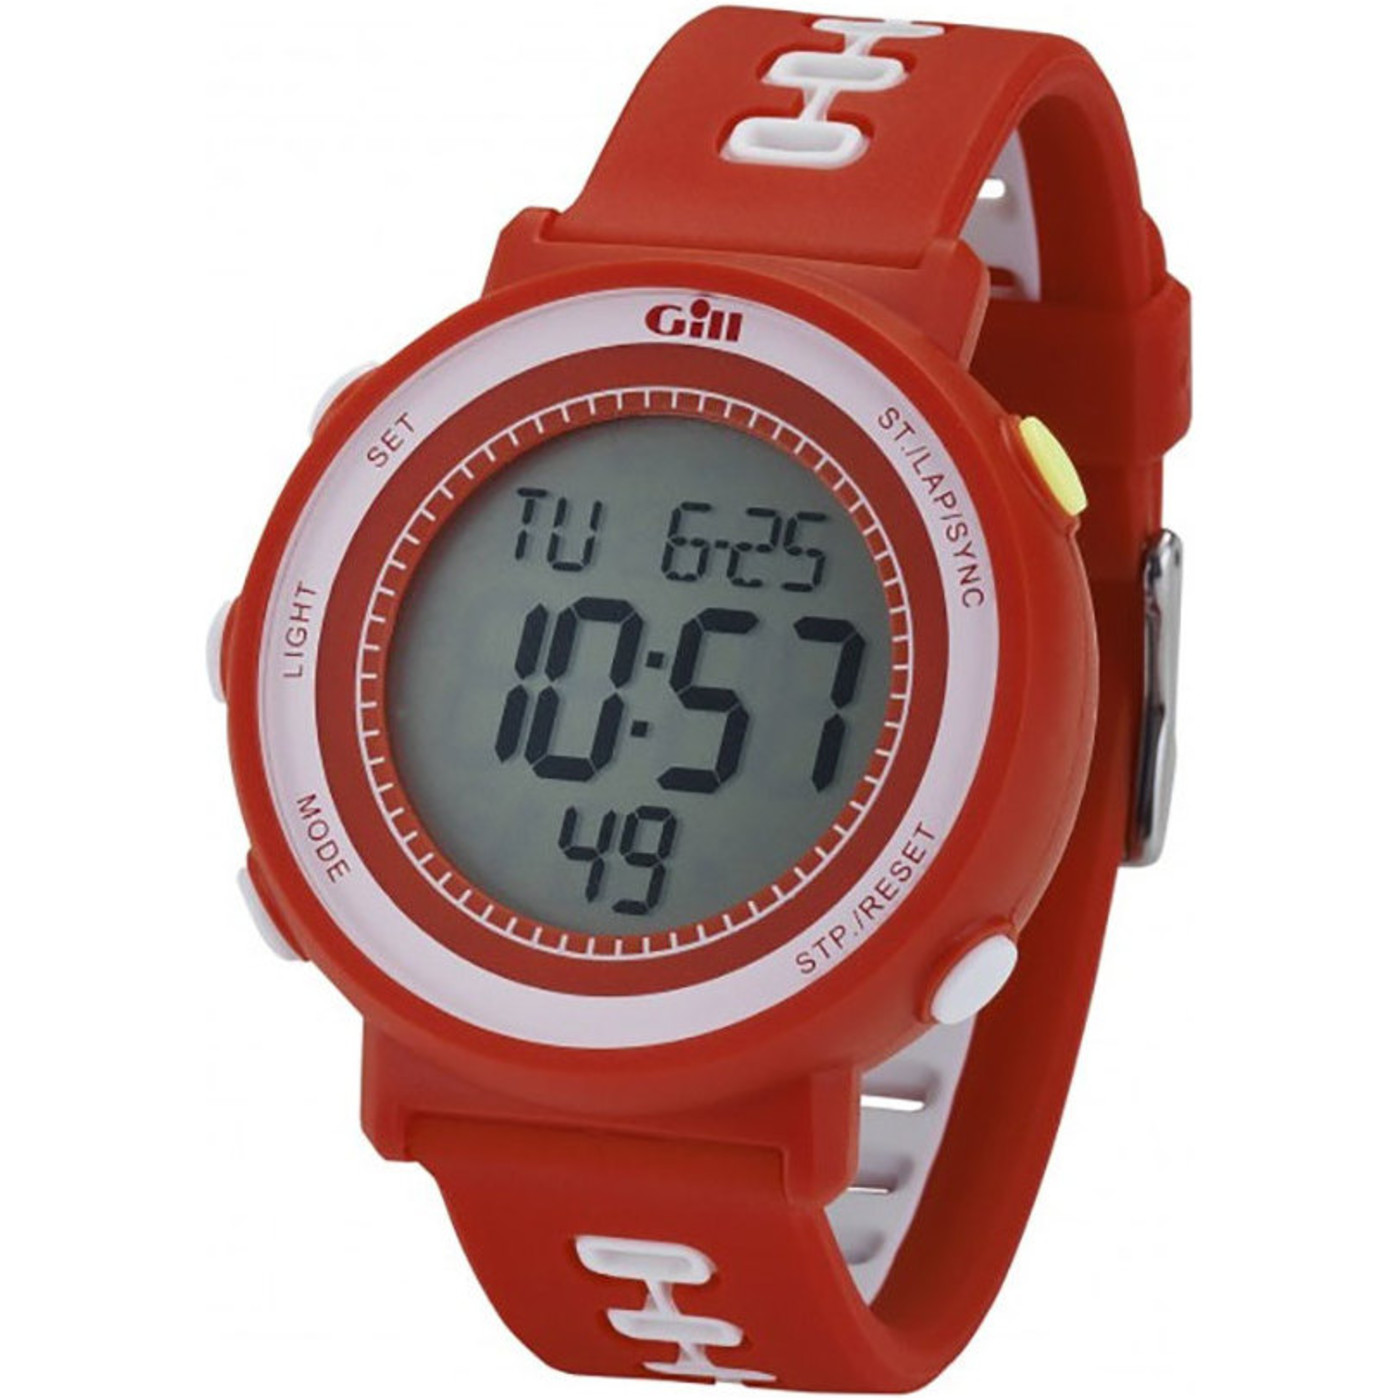 Gill Race Watch Timer Red W013 - Sailing - Accessories - Watches ...